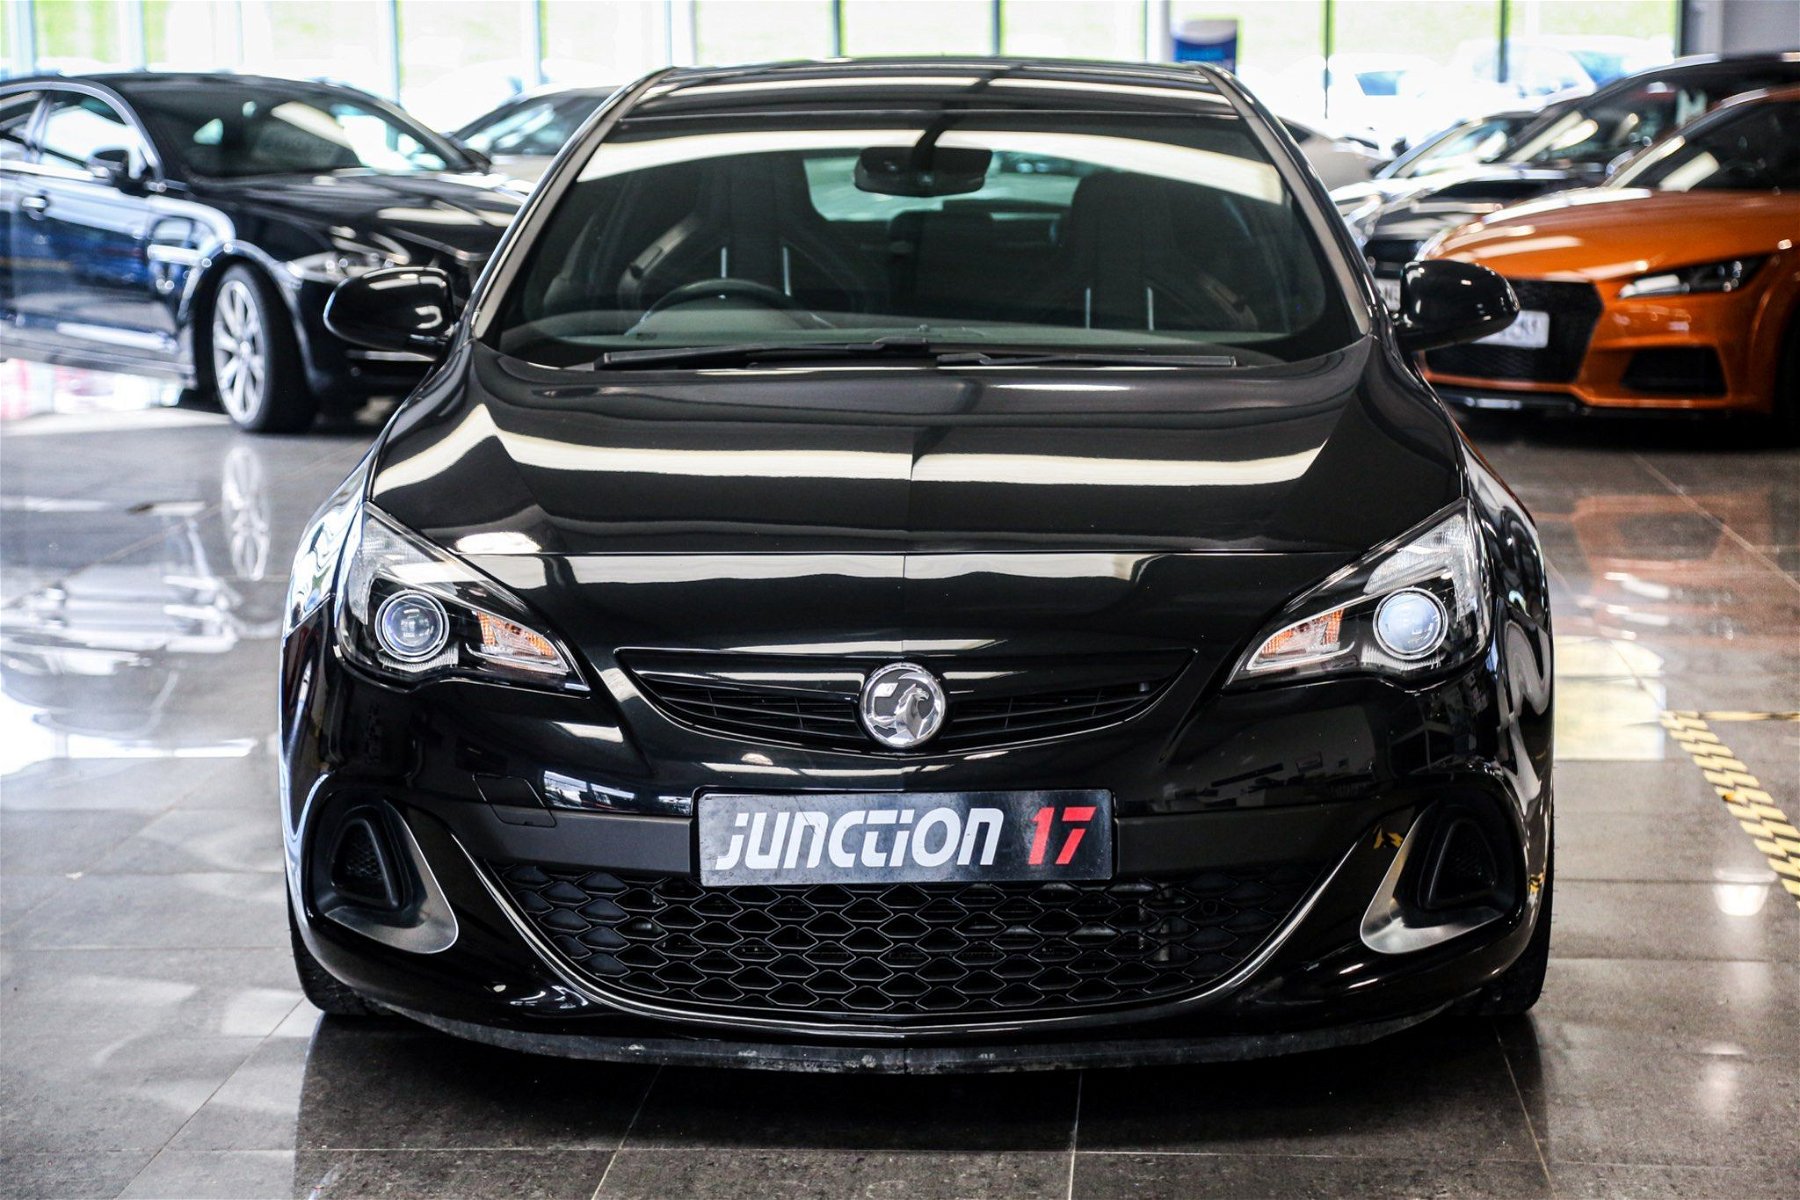 Vauxhall Astra Gtc for sale in Peterborough - Part Exchange Welcome